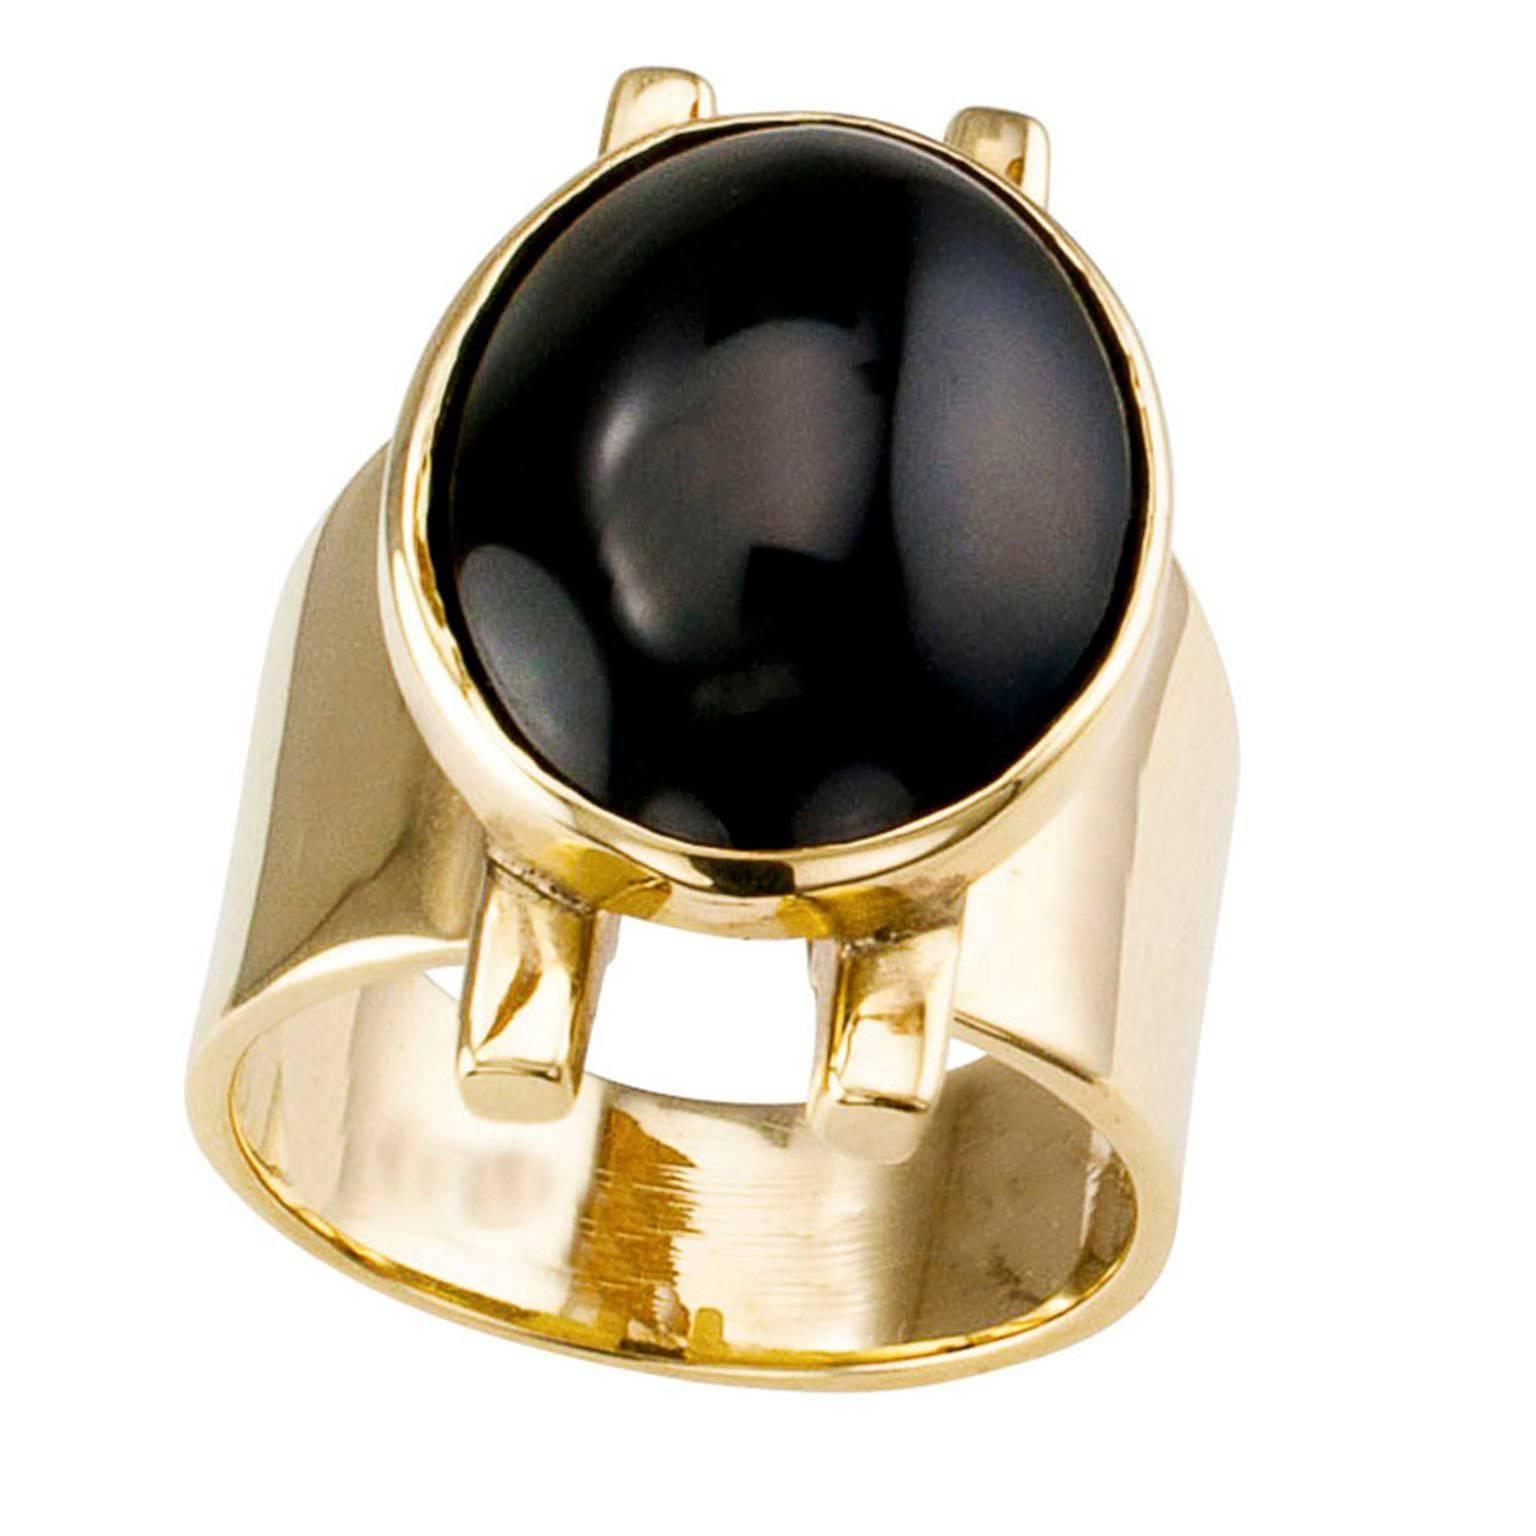 Rigoberto Onyx and Gold Ring

Onyx and gold ring by Rigoberto circa 2000.  The design features parallel lines floating on a wide band with a bezel-set black onyx cabochon vertical to the fingernail.
RING SIZE:  6 1/4, can be sized.
DIMENSIONS: 